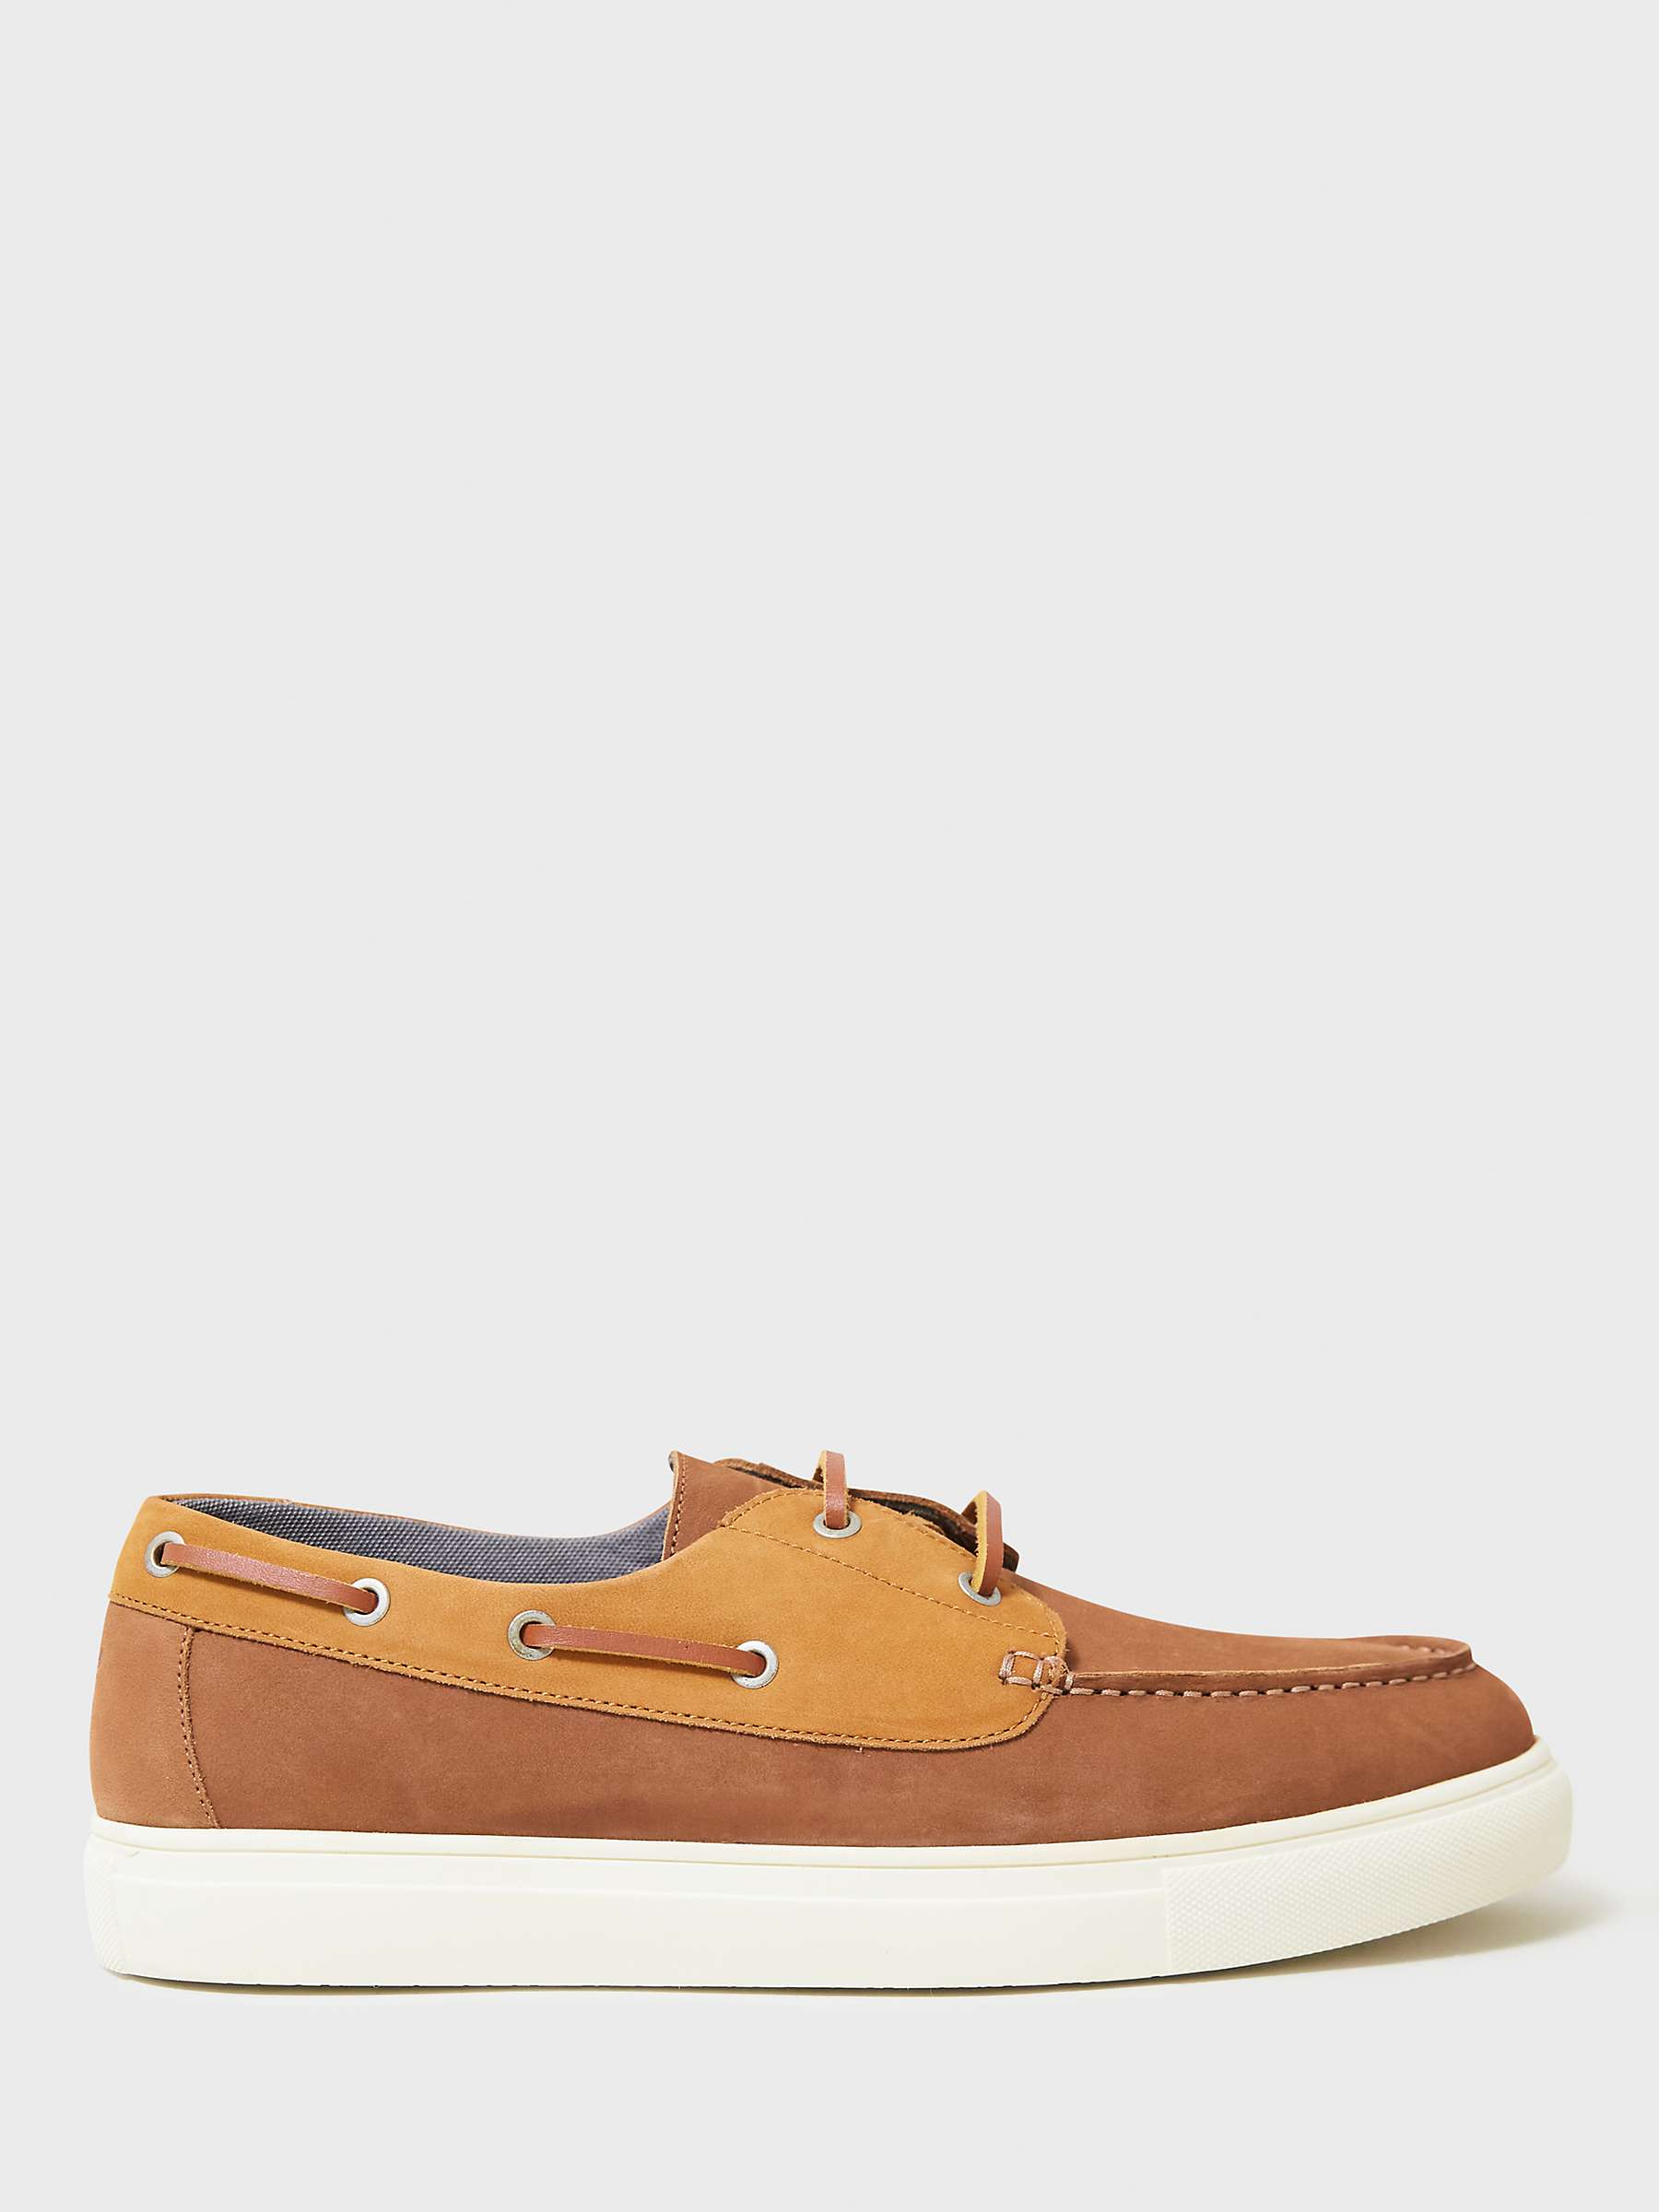 Buy Crew Clothing Hybrid Deck Shoes, Brown Online at johnlewis.com